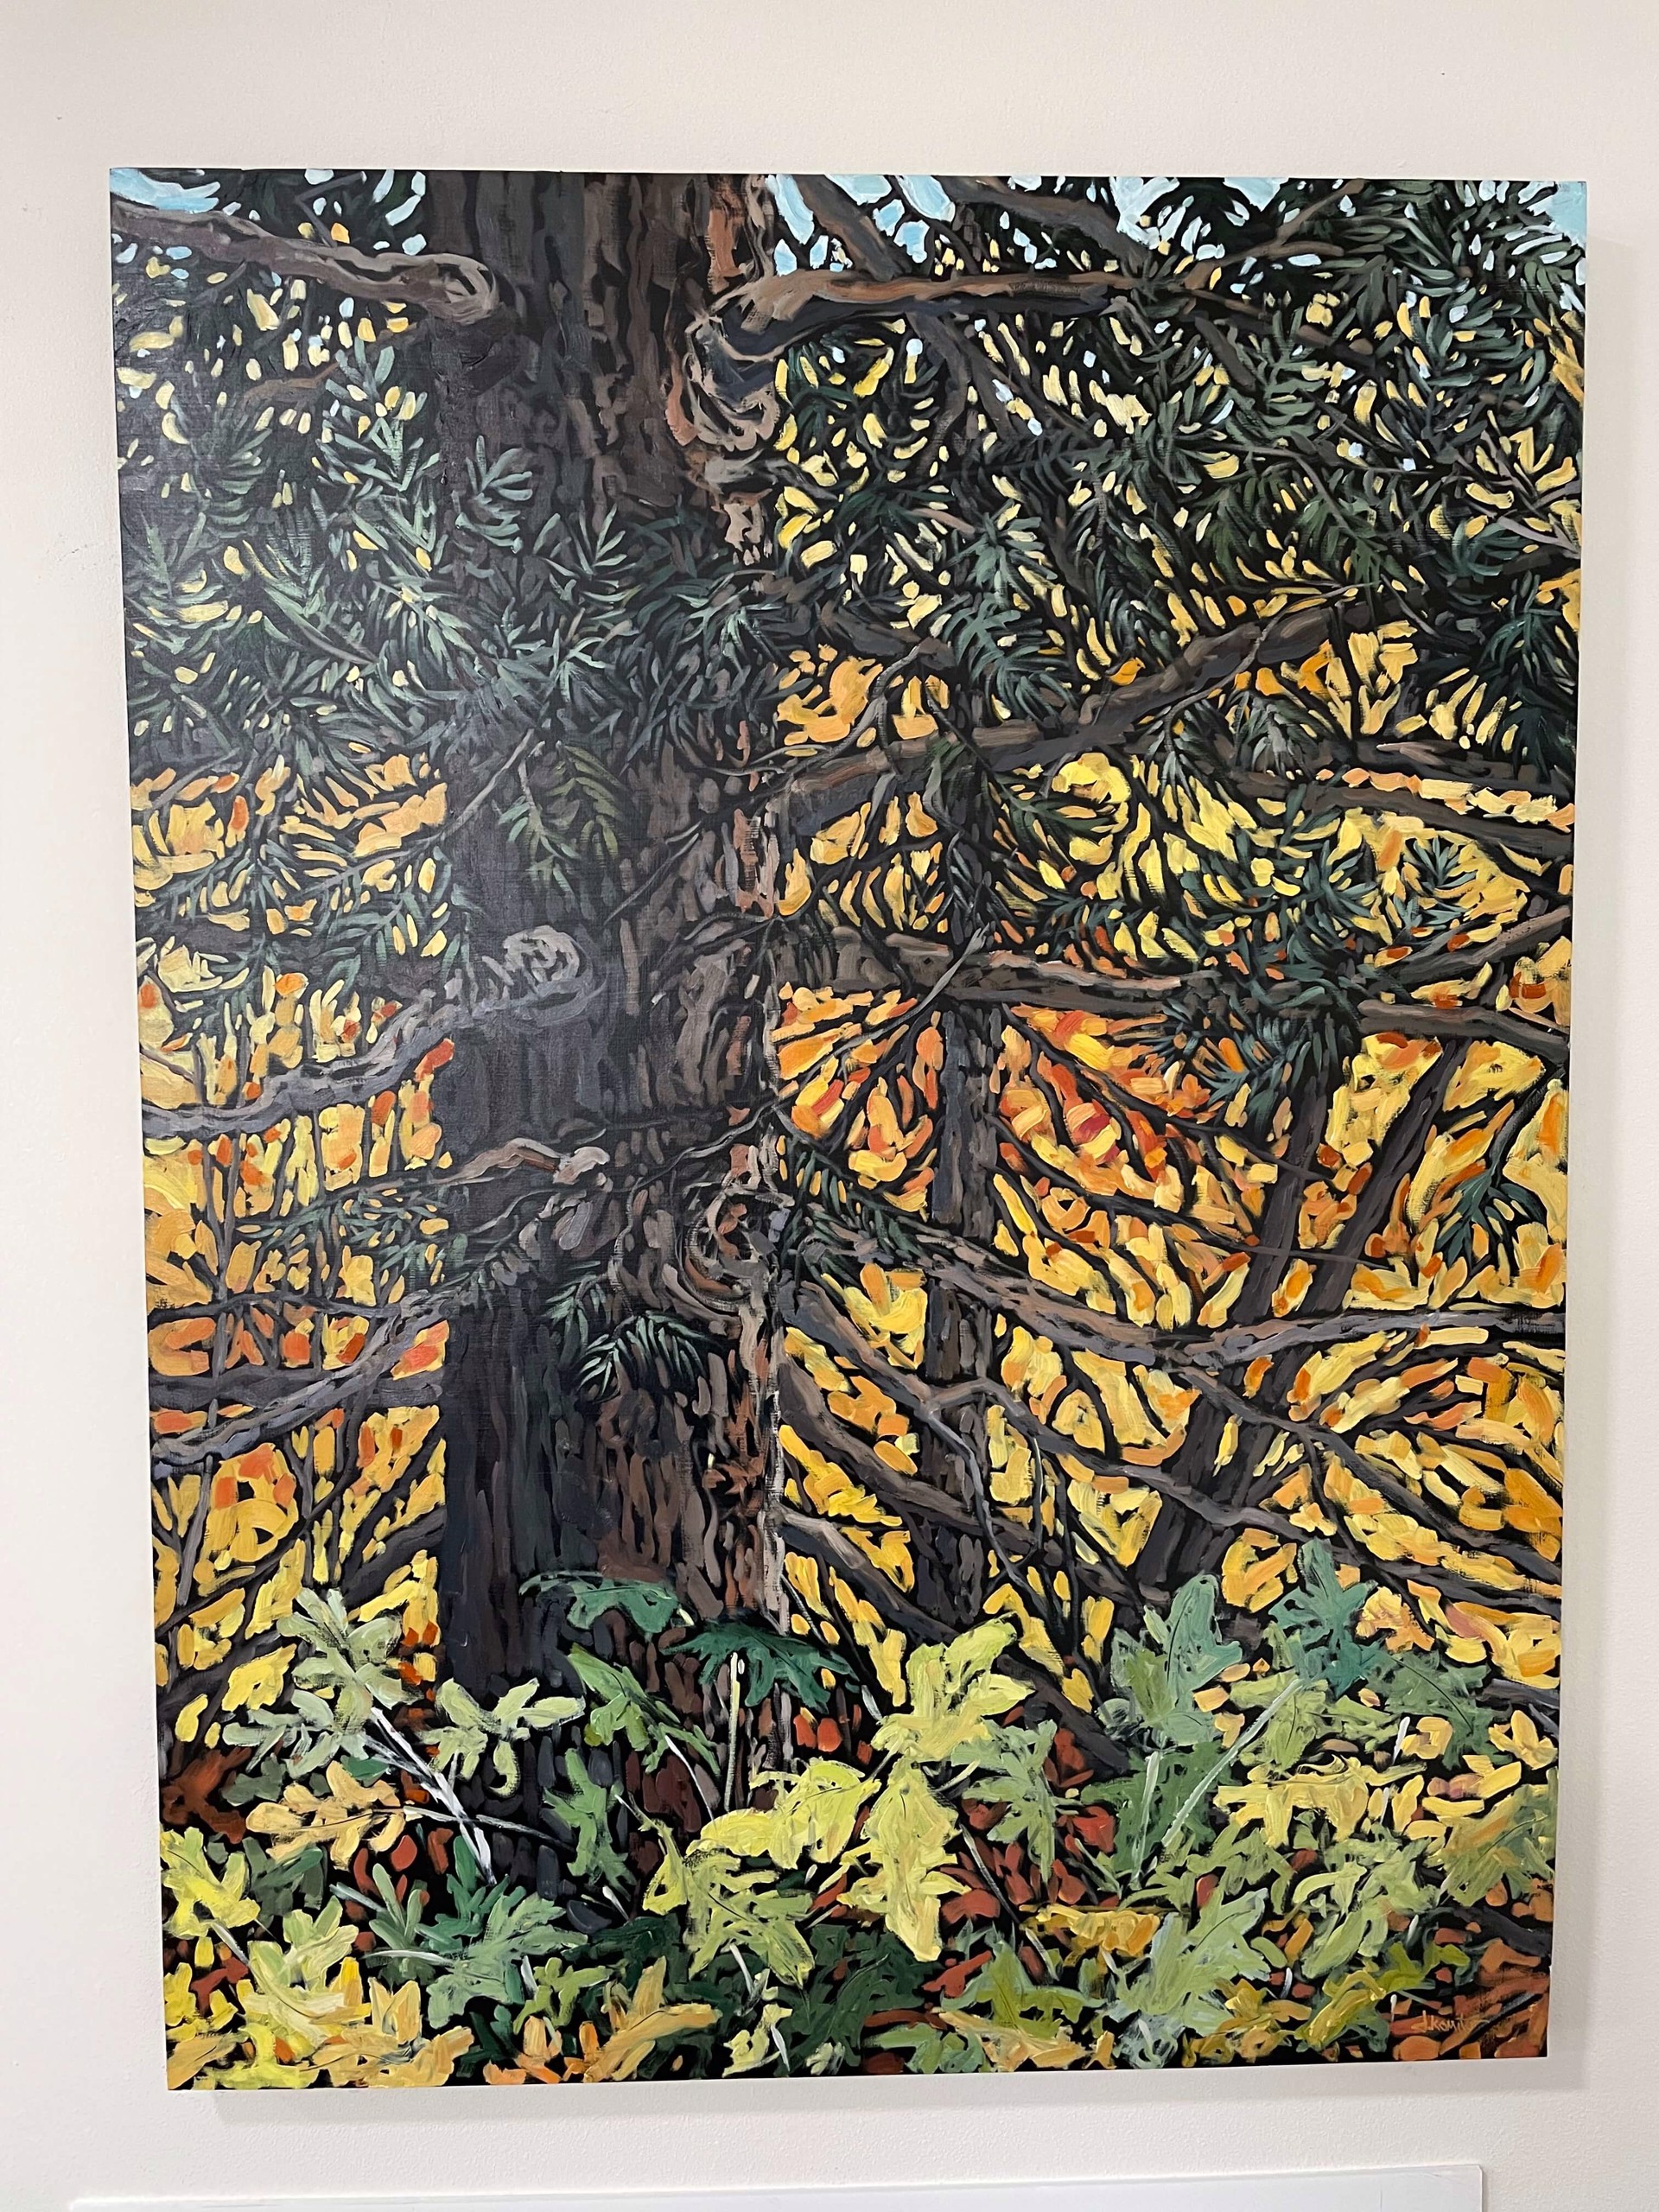 Celebrating Autumn With the Mother Tree by Deb Komitor